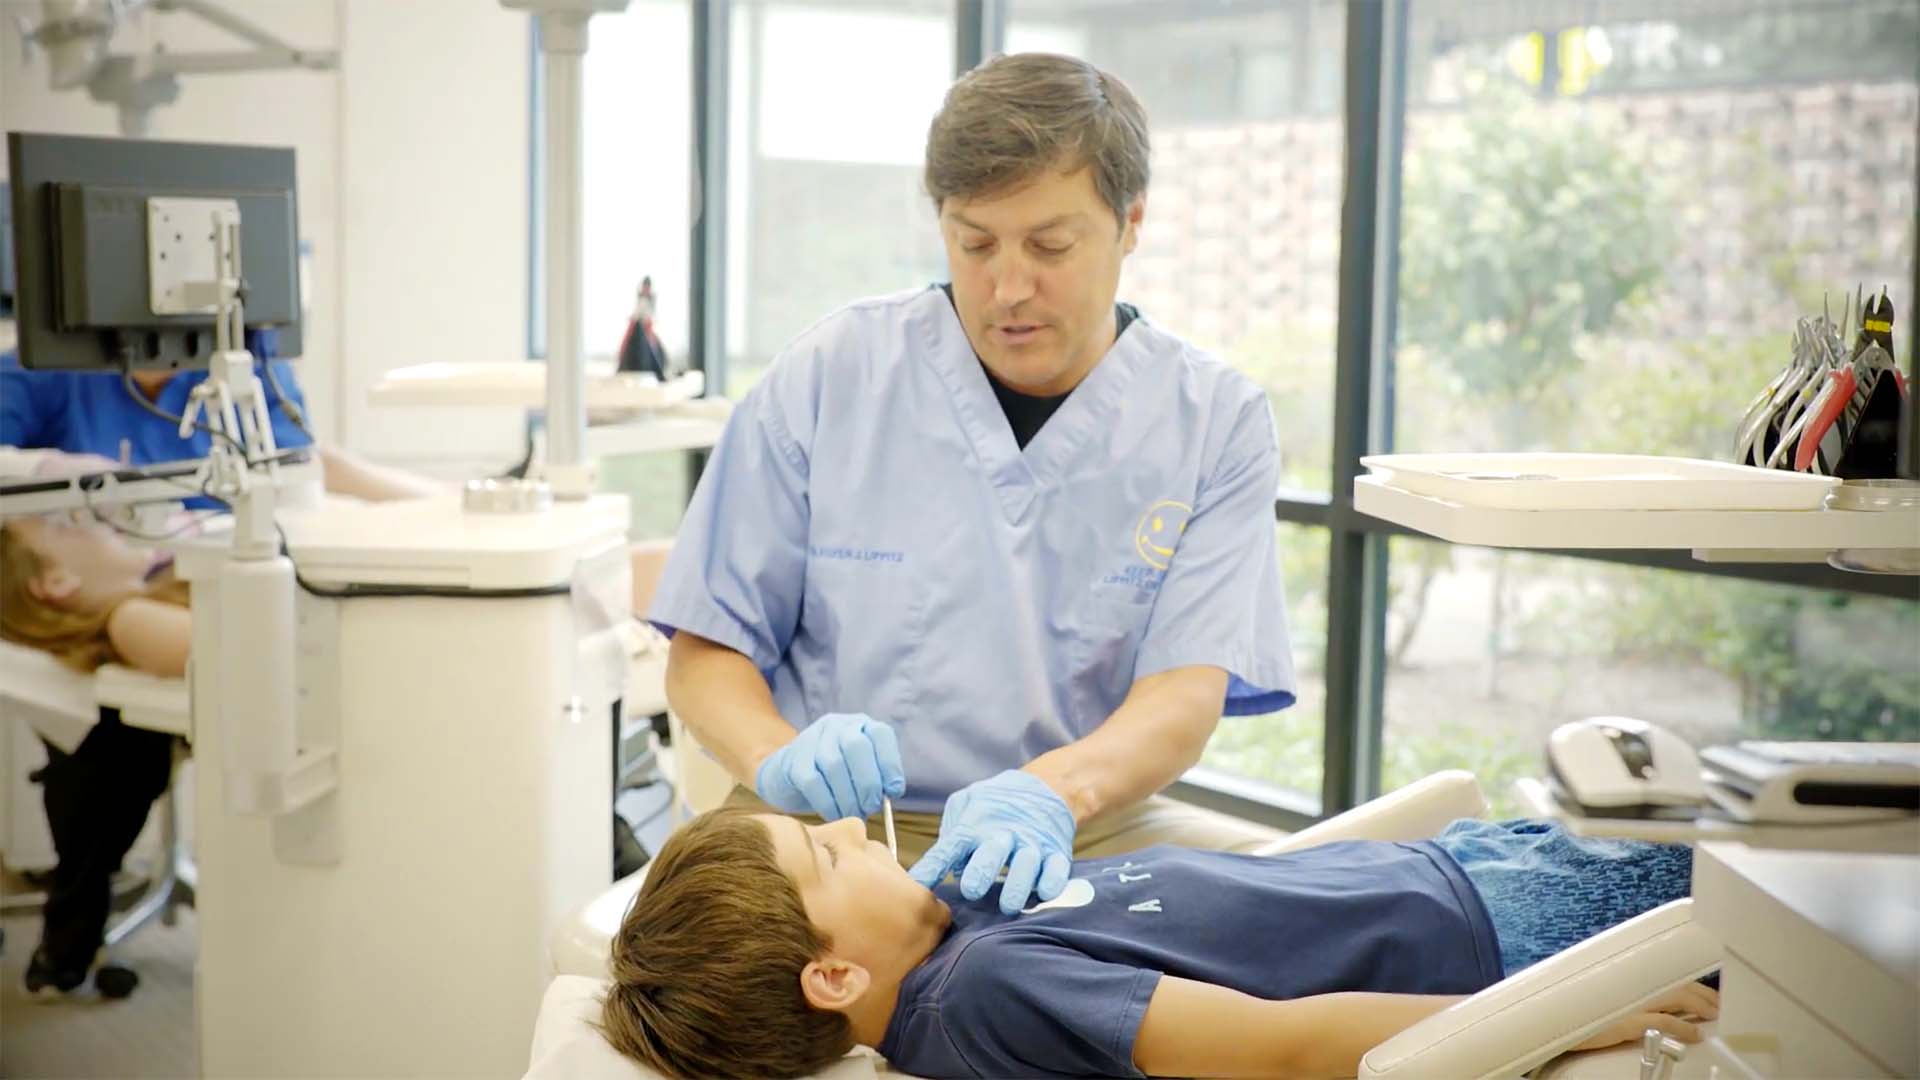 Dr Lippitz performs an orthodontic examination of a patient from Winnetka